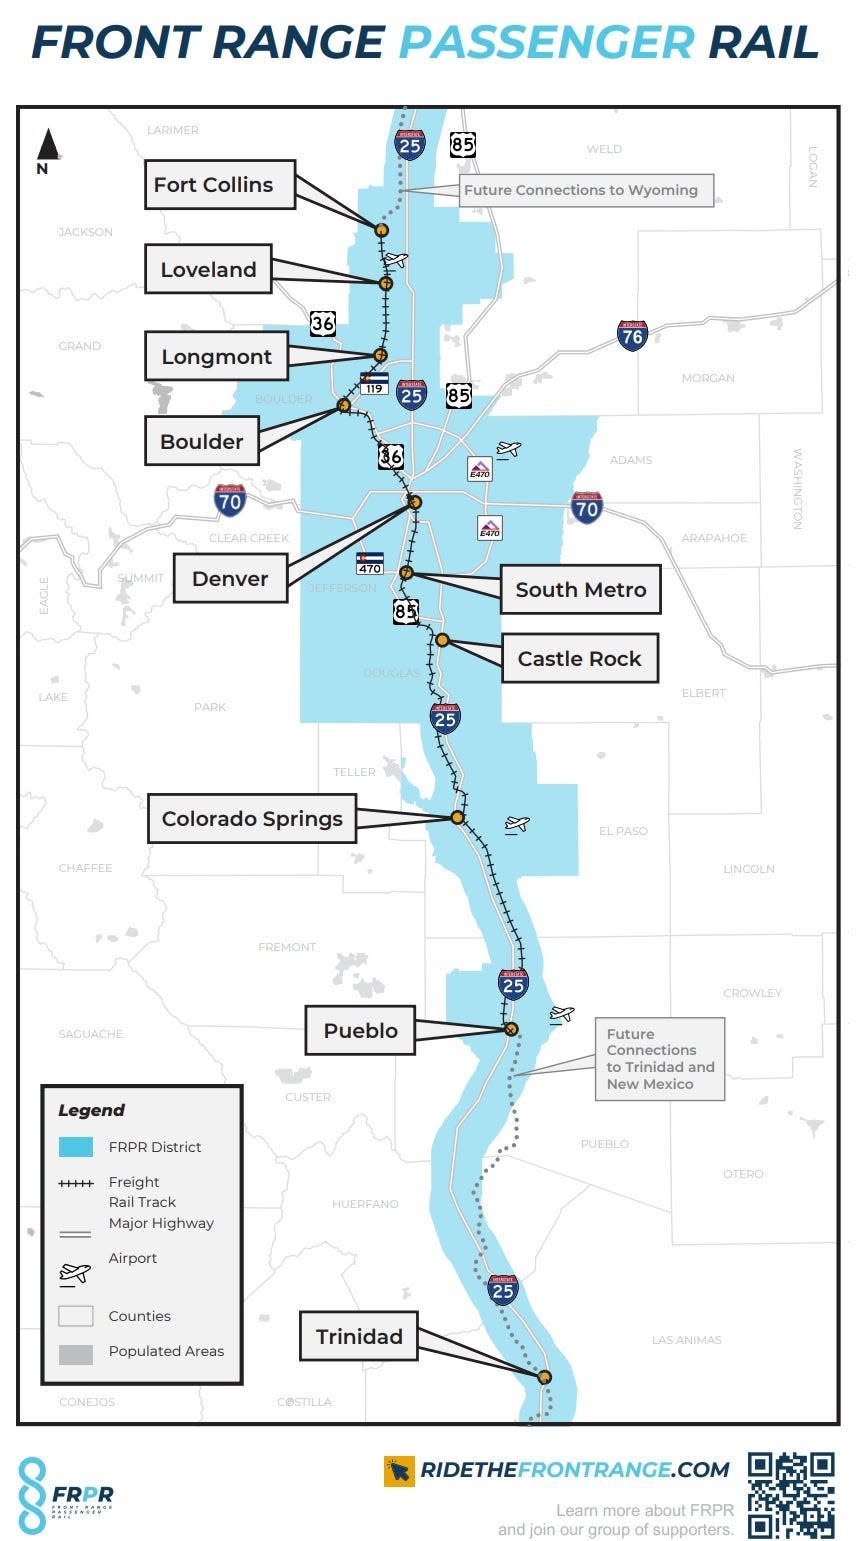 This map shows the Front Range Passenger Rail District, which is developing a passenger rail line between Fort Collins and Pueblo.